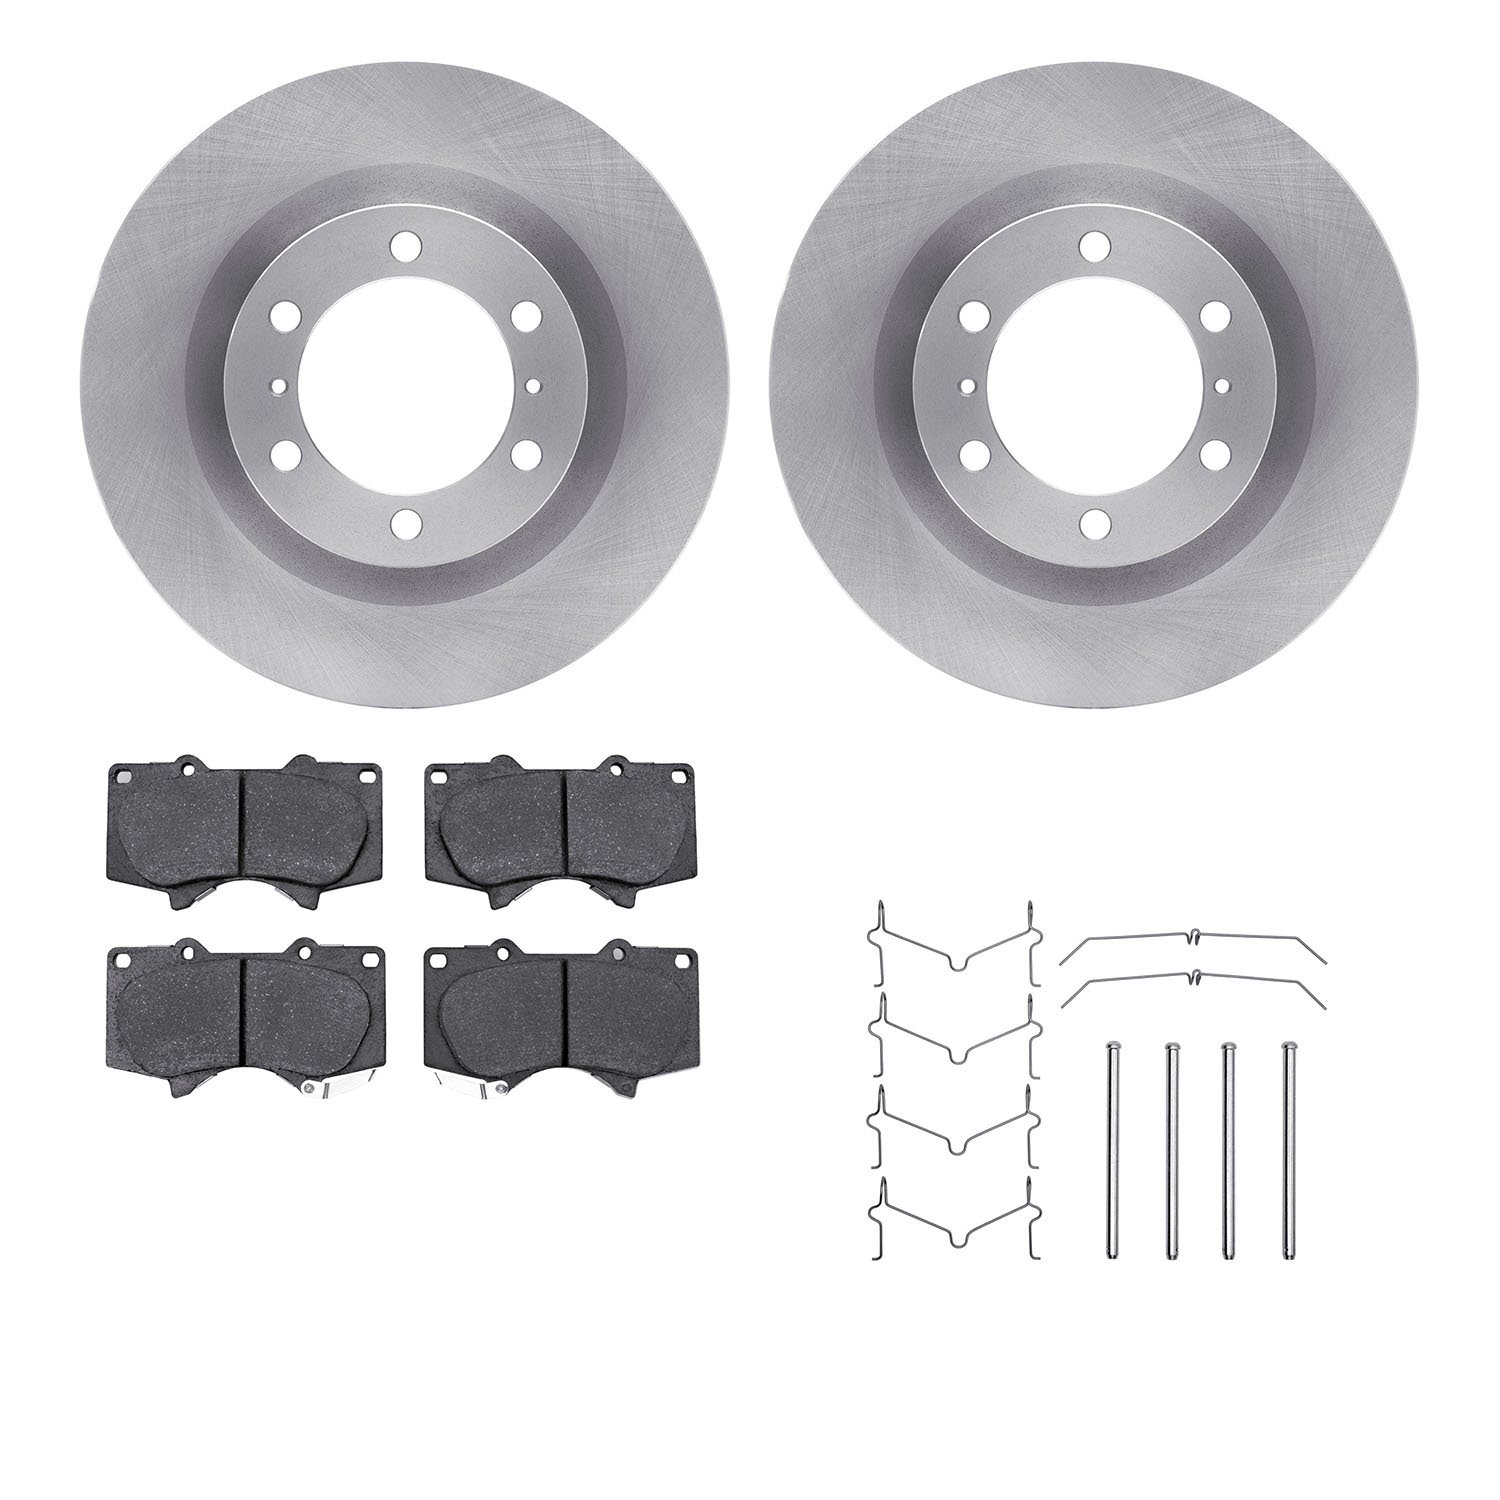 6412-76064 Brake Rotors with Ultimate-Duty Brake Pads Kit & Hardware, Fits Select Lexus/Toyota/Scion, Position: Front